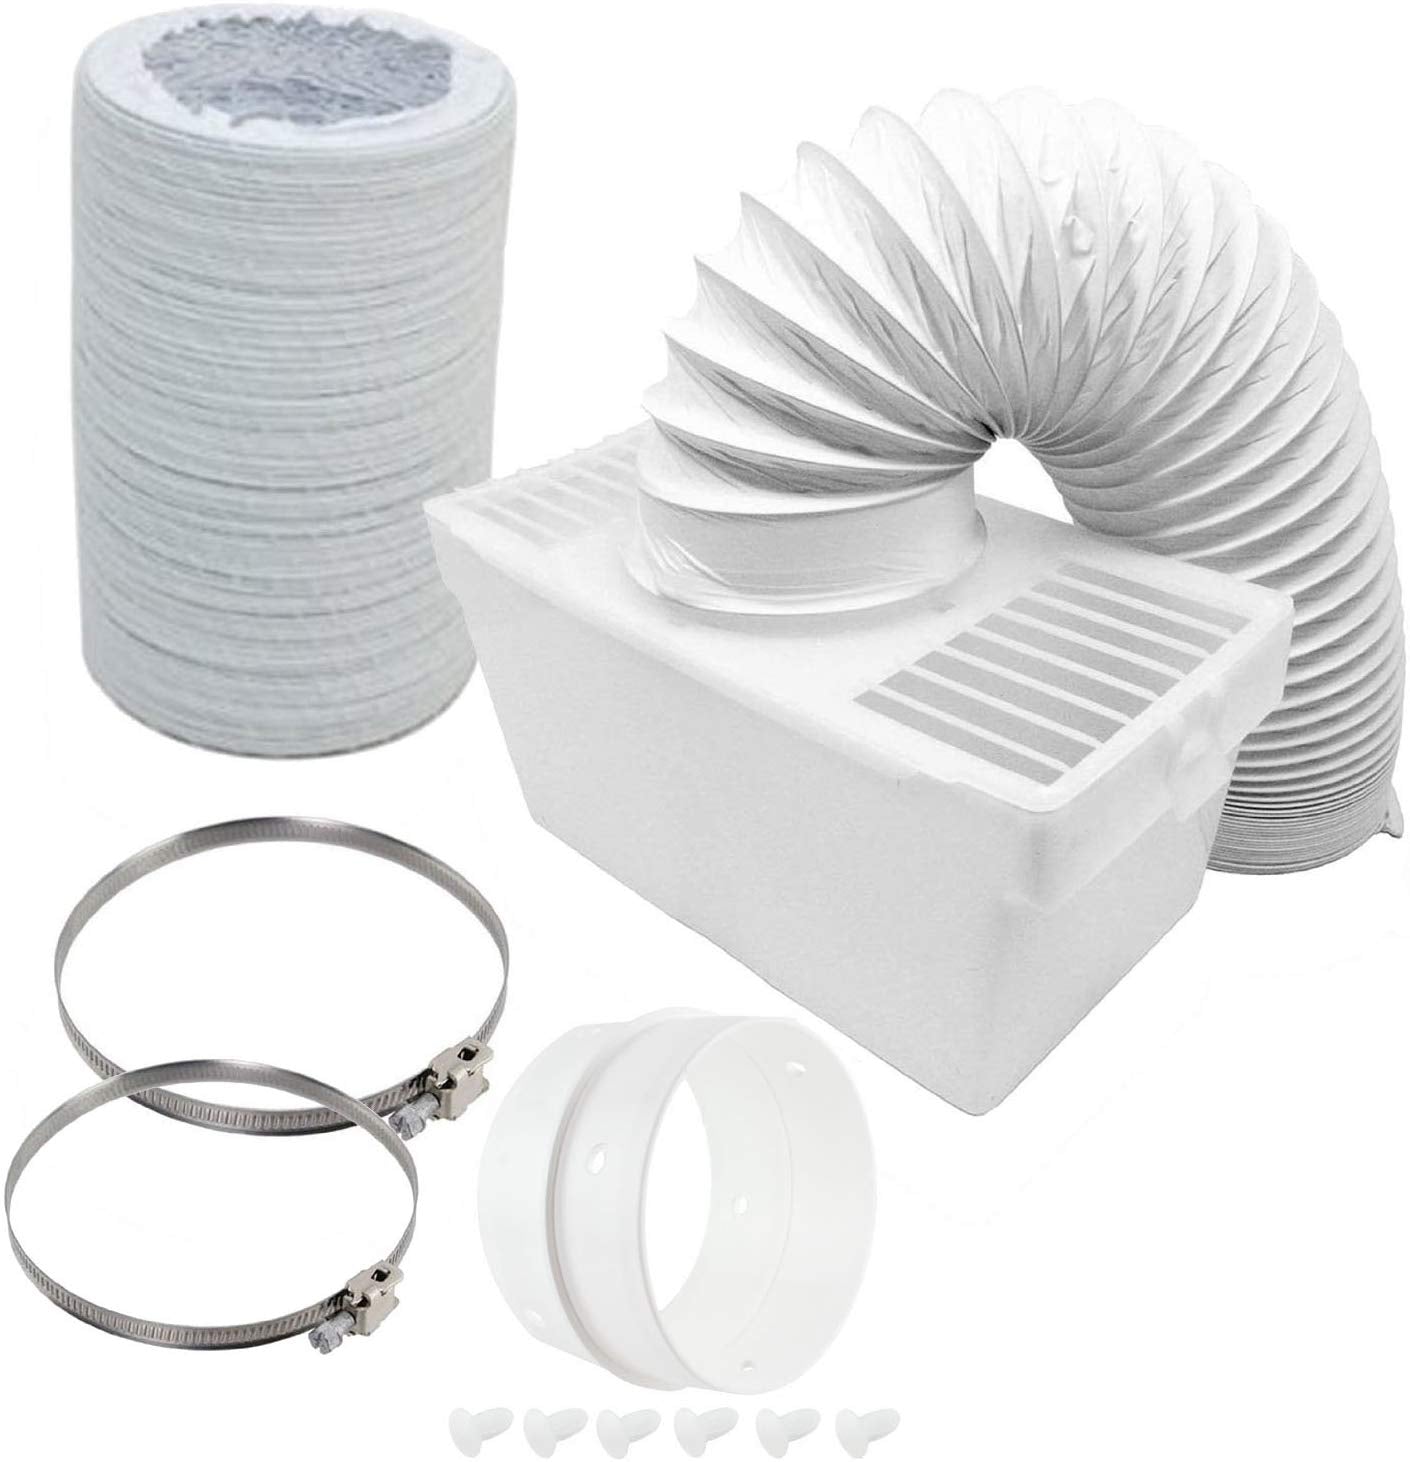 Condenser Box & Extra Long Hose Kit With Connection Ring for Zanussi Tumble Dryer (4" / 100mm Diameter / 6M Hose)